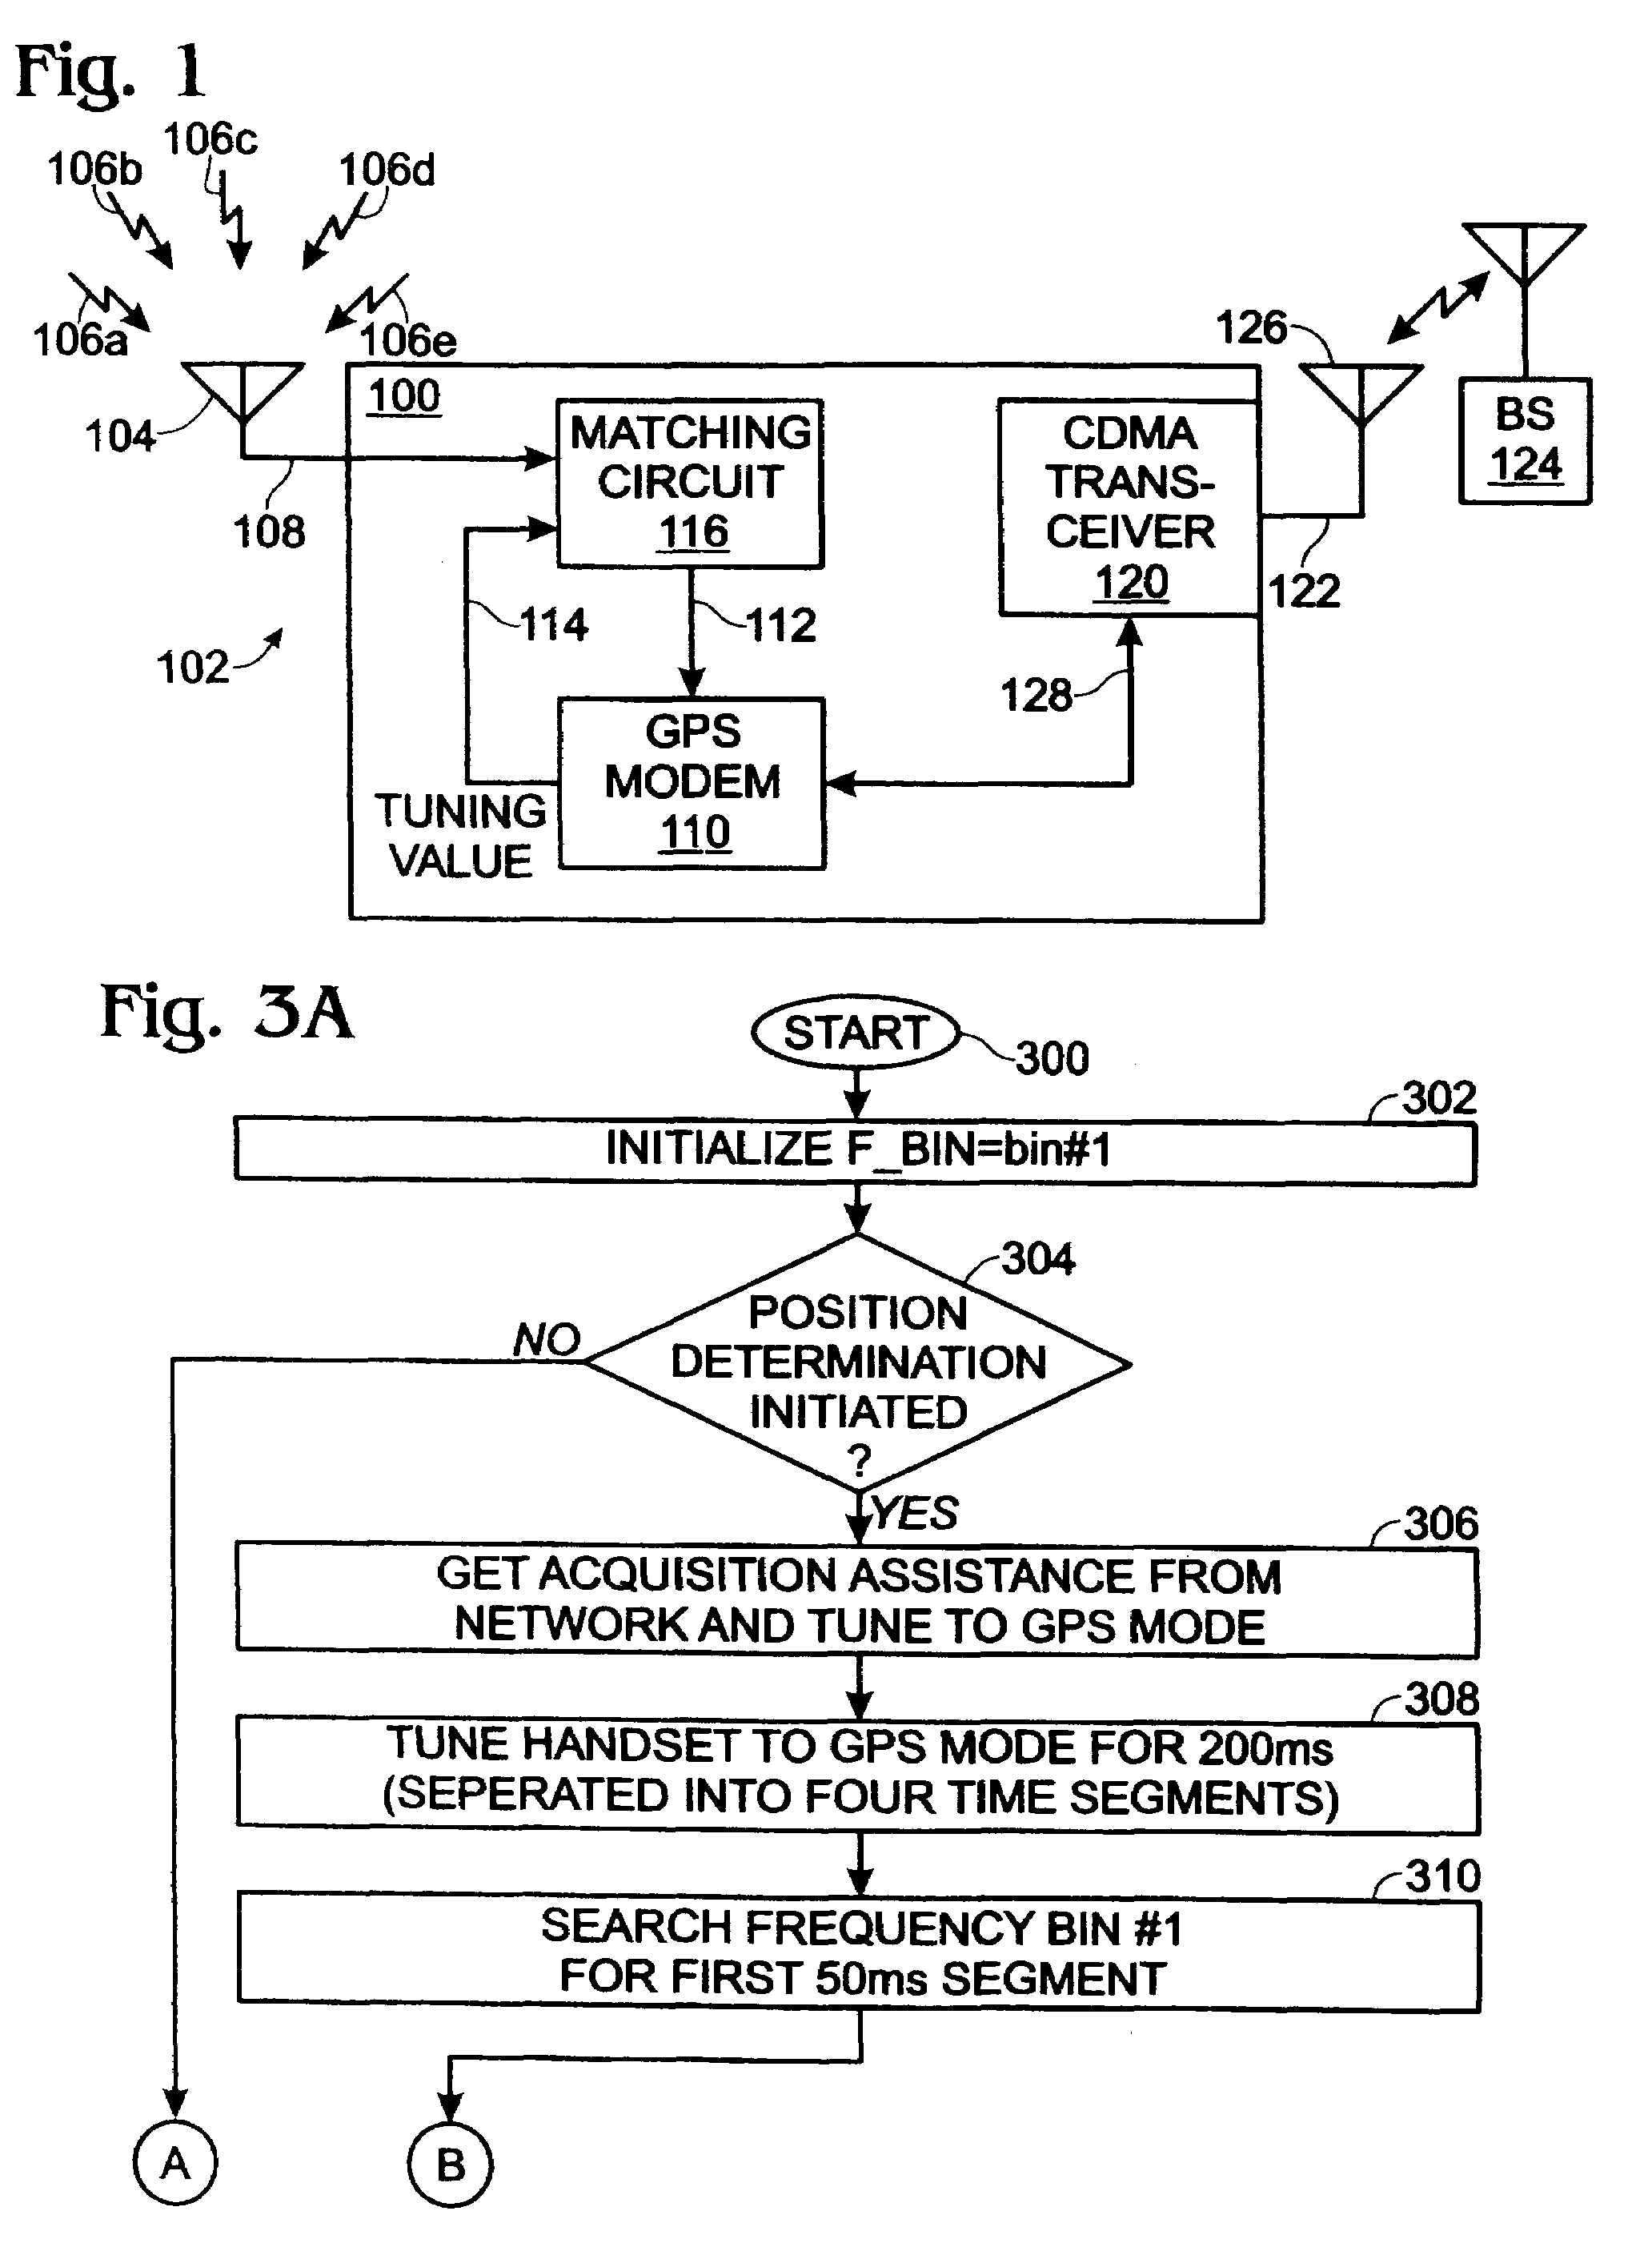 Method for tuning a GPS antenna matching network